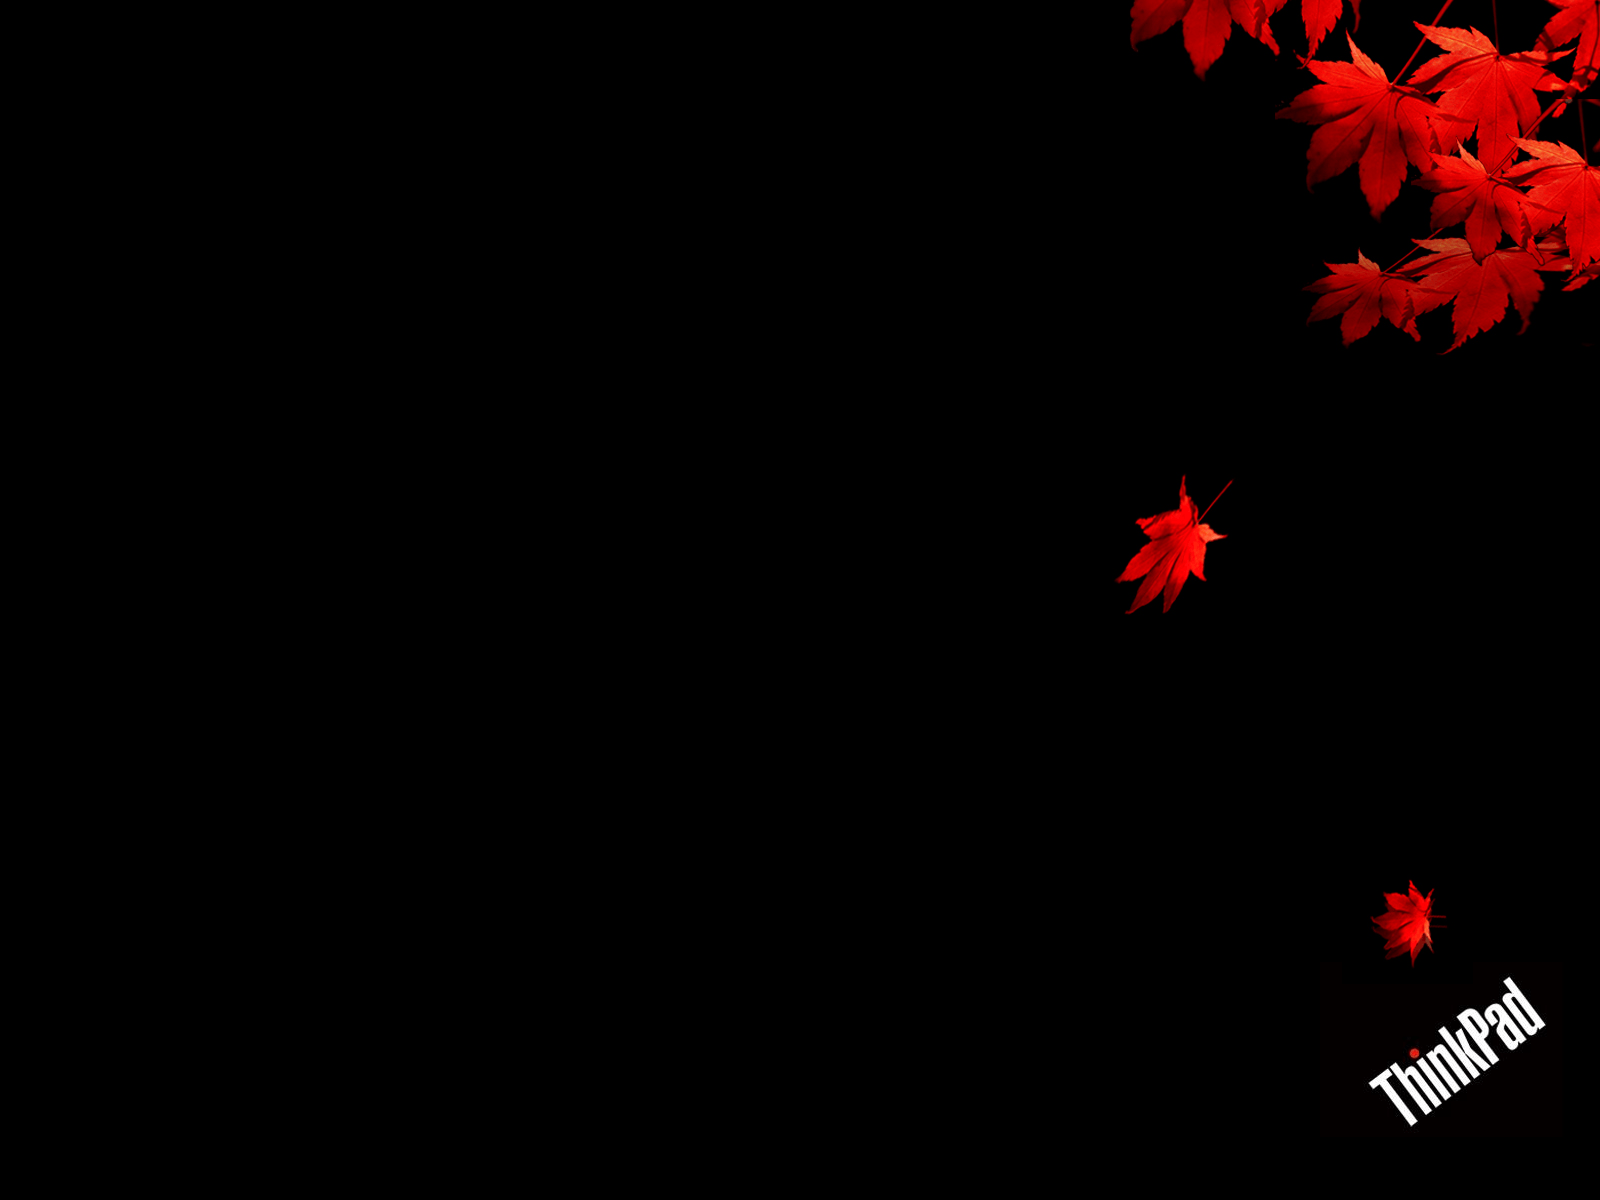 Cool Lenovo Wallpapers 19599 1600x1200 px ~ HDWallSource